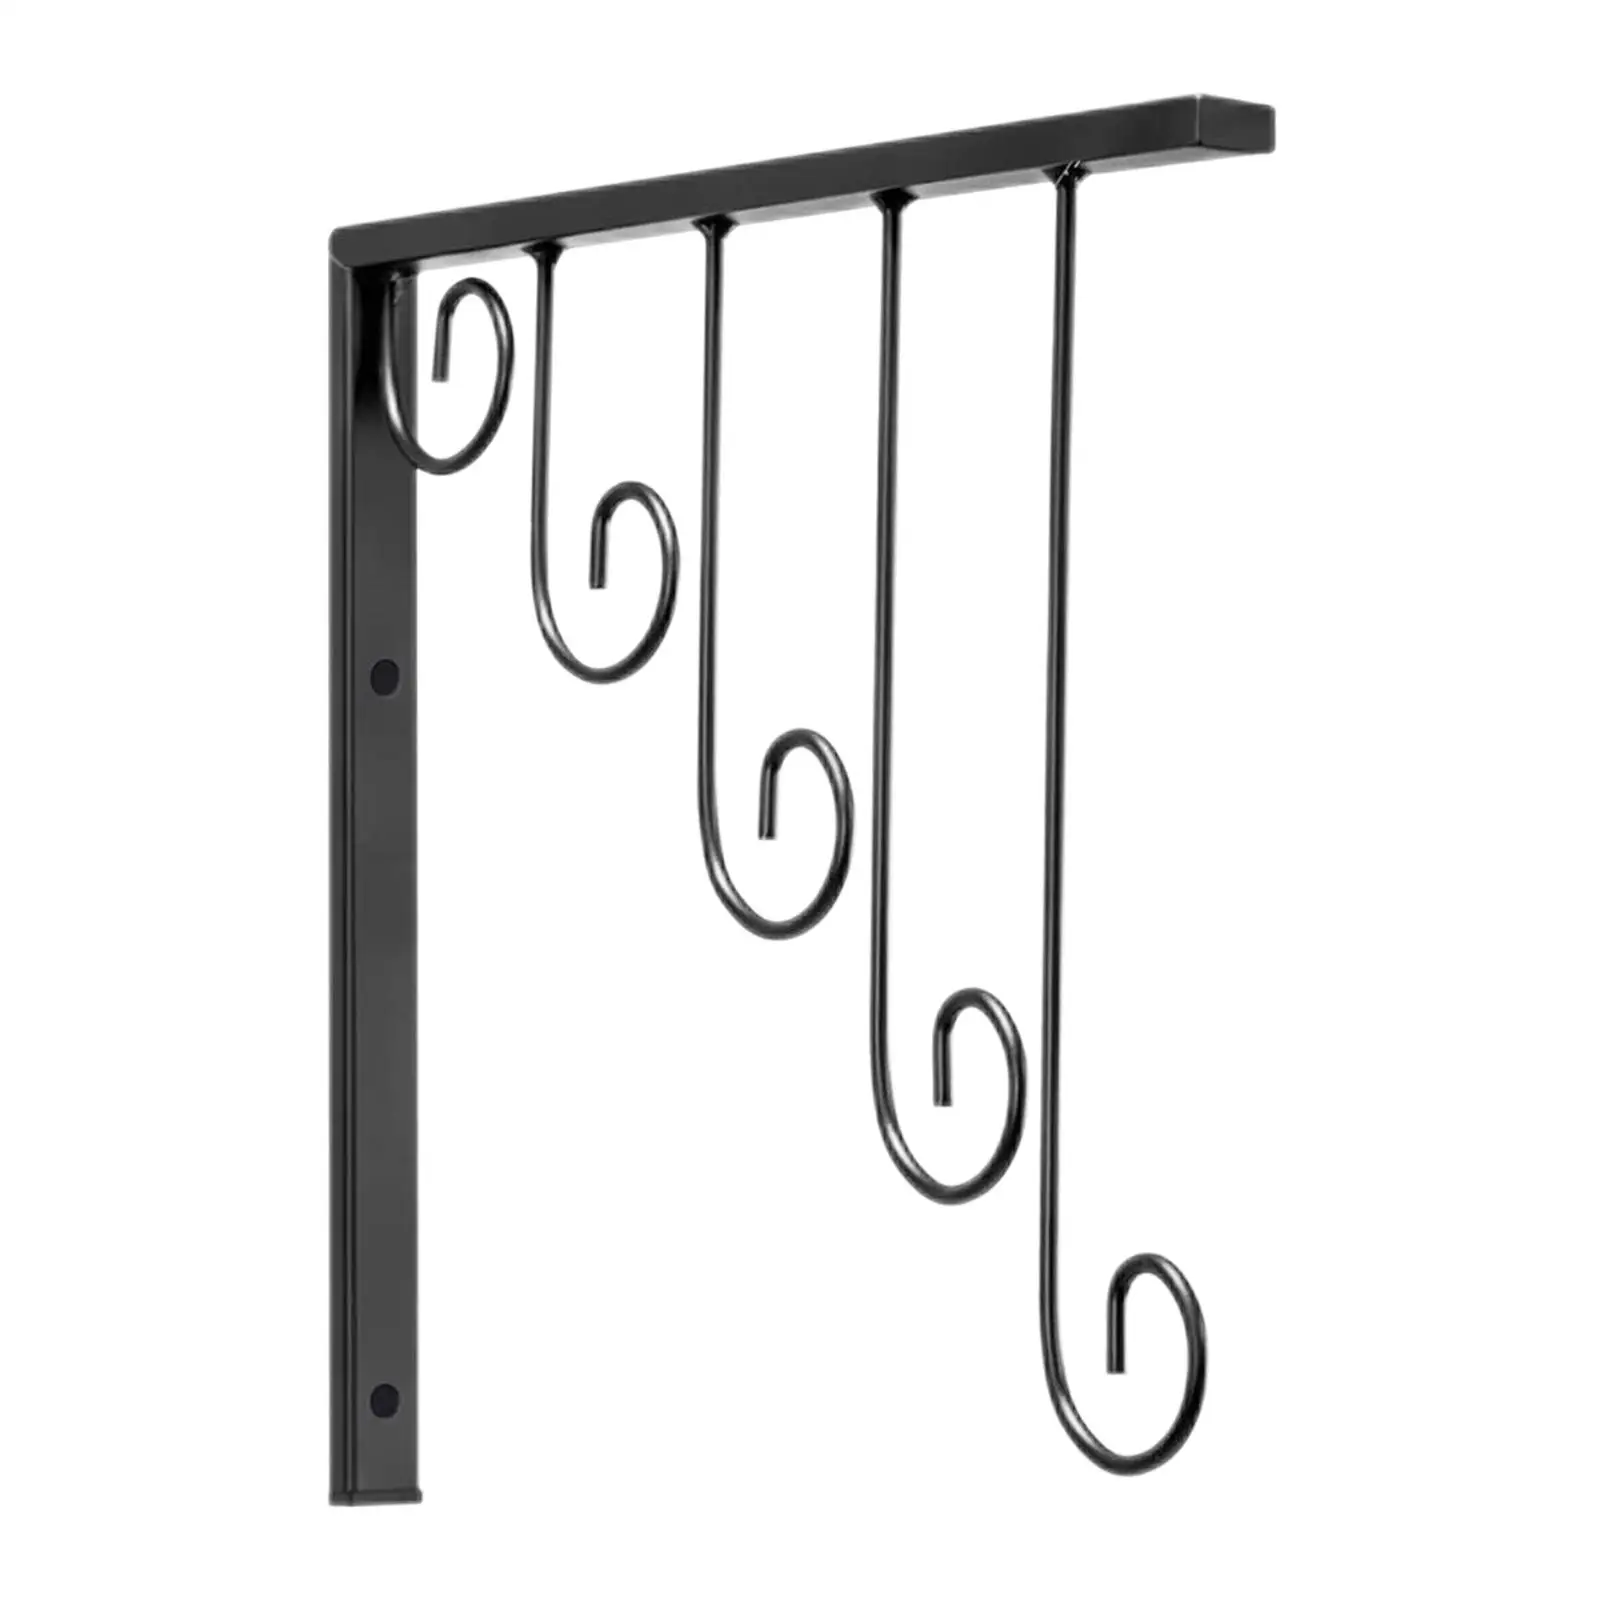 Wrought Iron Hangers Wall Mount Easy Installation Durable Hanging Clothes Display Rack for Home Coat Pants Jeans Clothes Storage